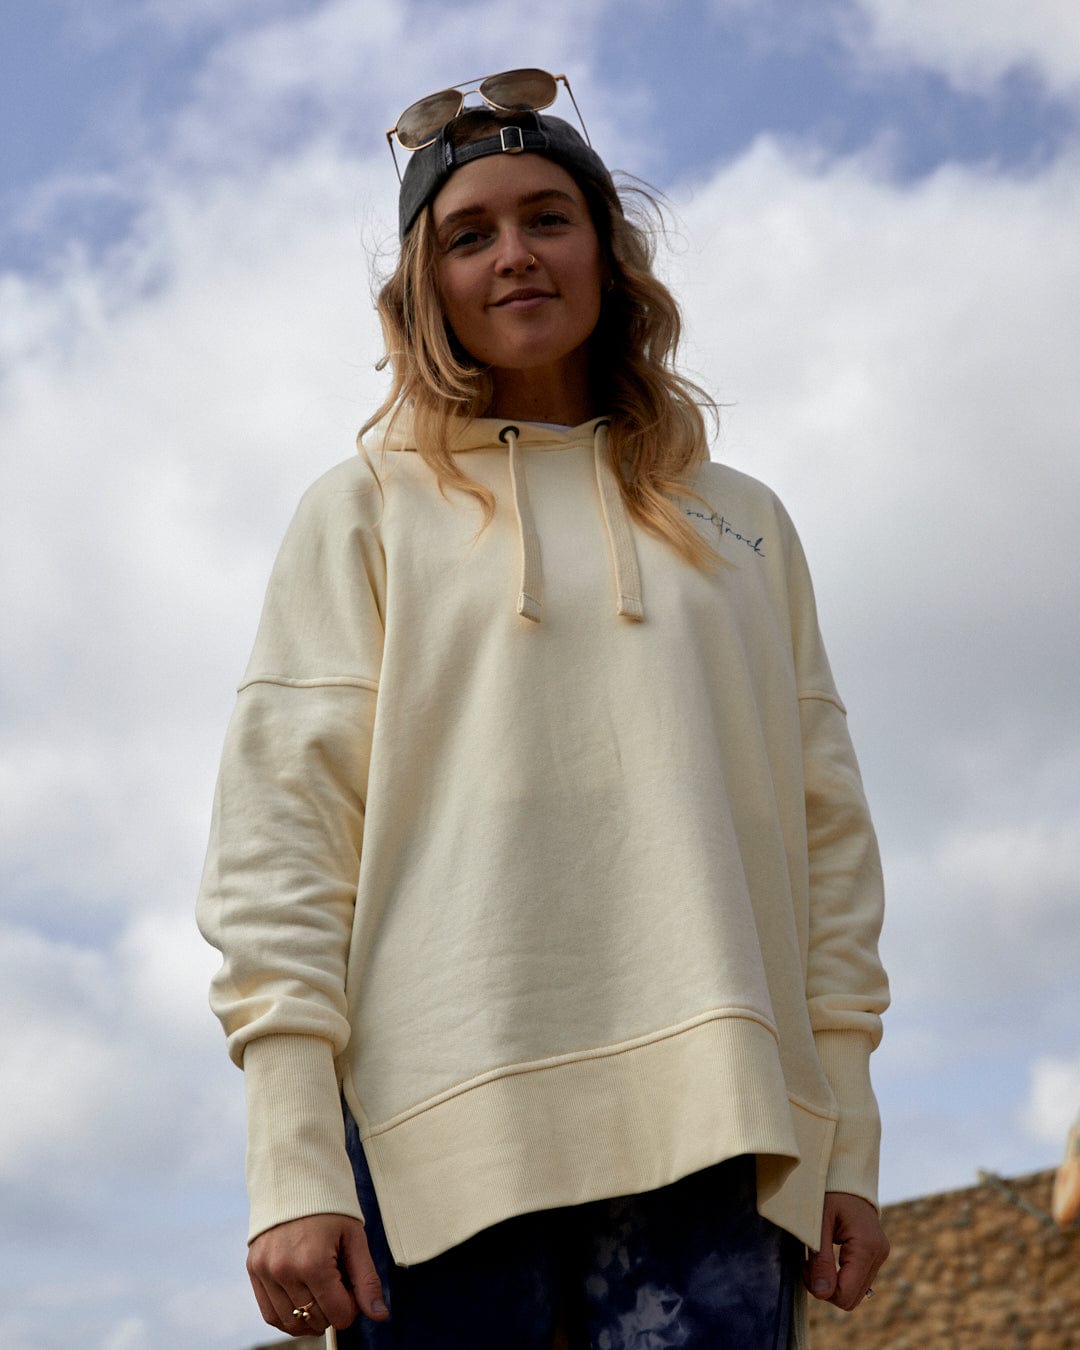 Woman in a Saltrock cream hoodie with Saltrock branding and sunglasses posing against a cloudy sky.